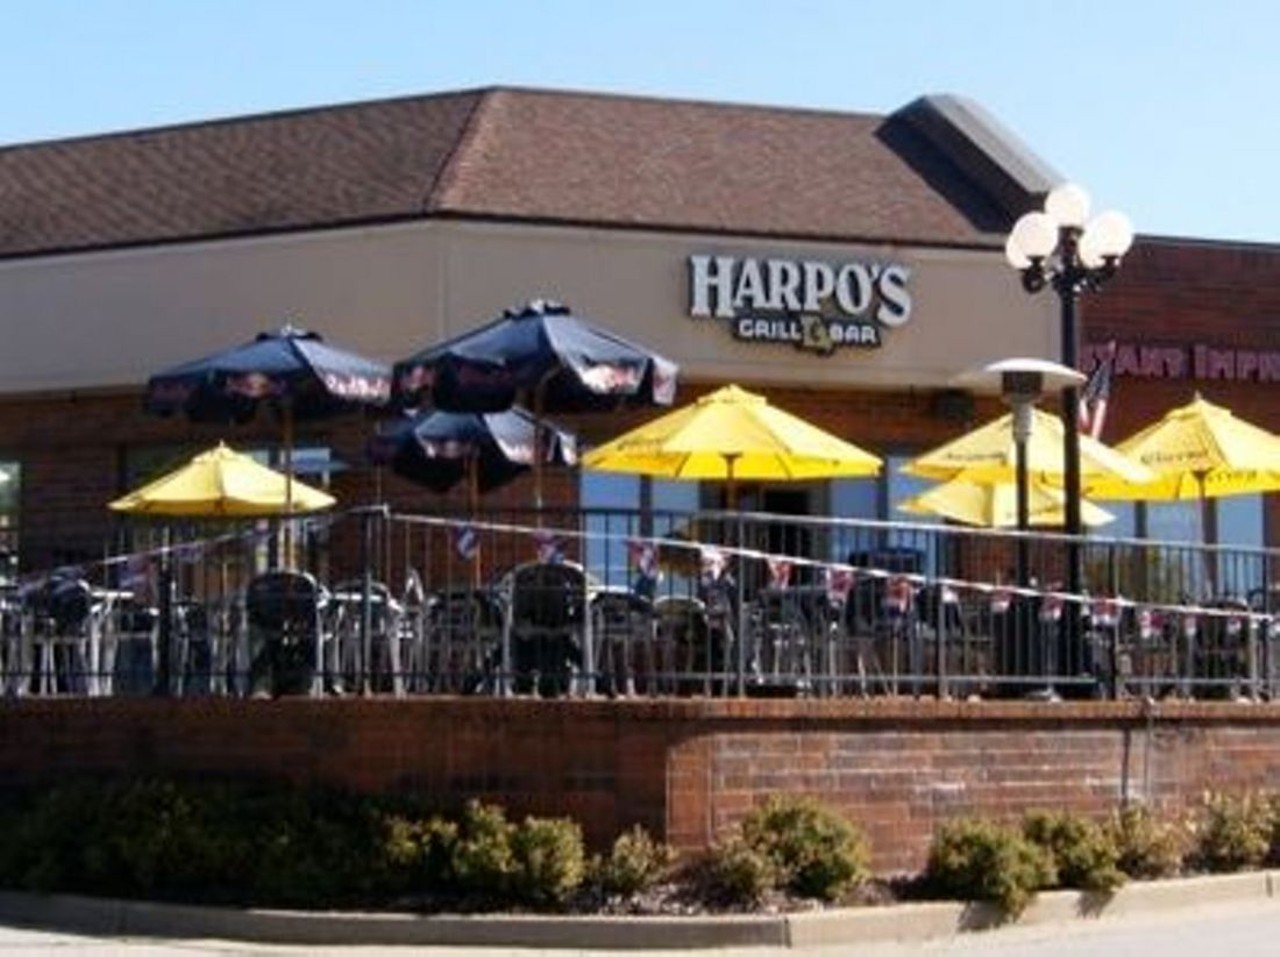 Best Bar in West County
Harpo's136 Hilltown Village Center, Chesterfield636-537-1970
Photo courtesy of RFT file photo